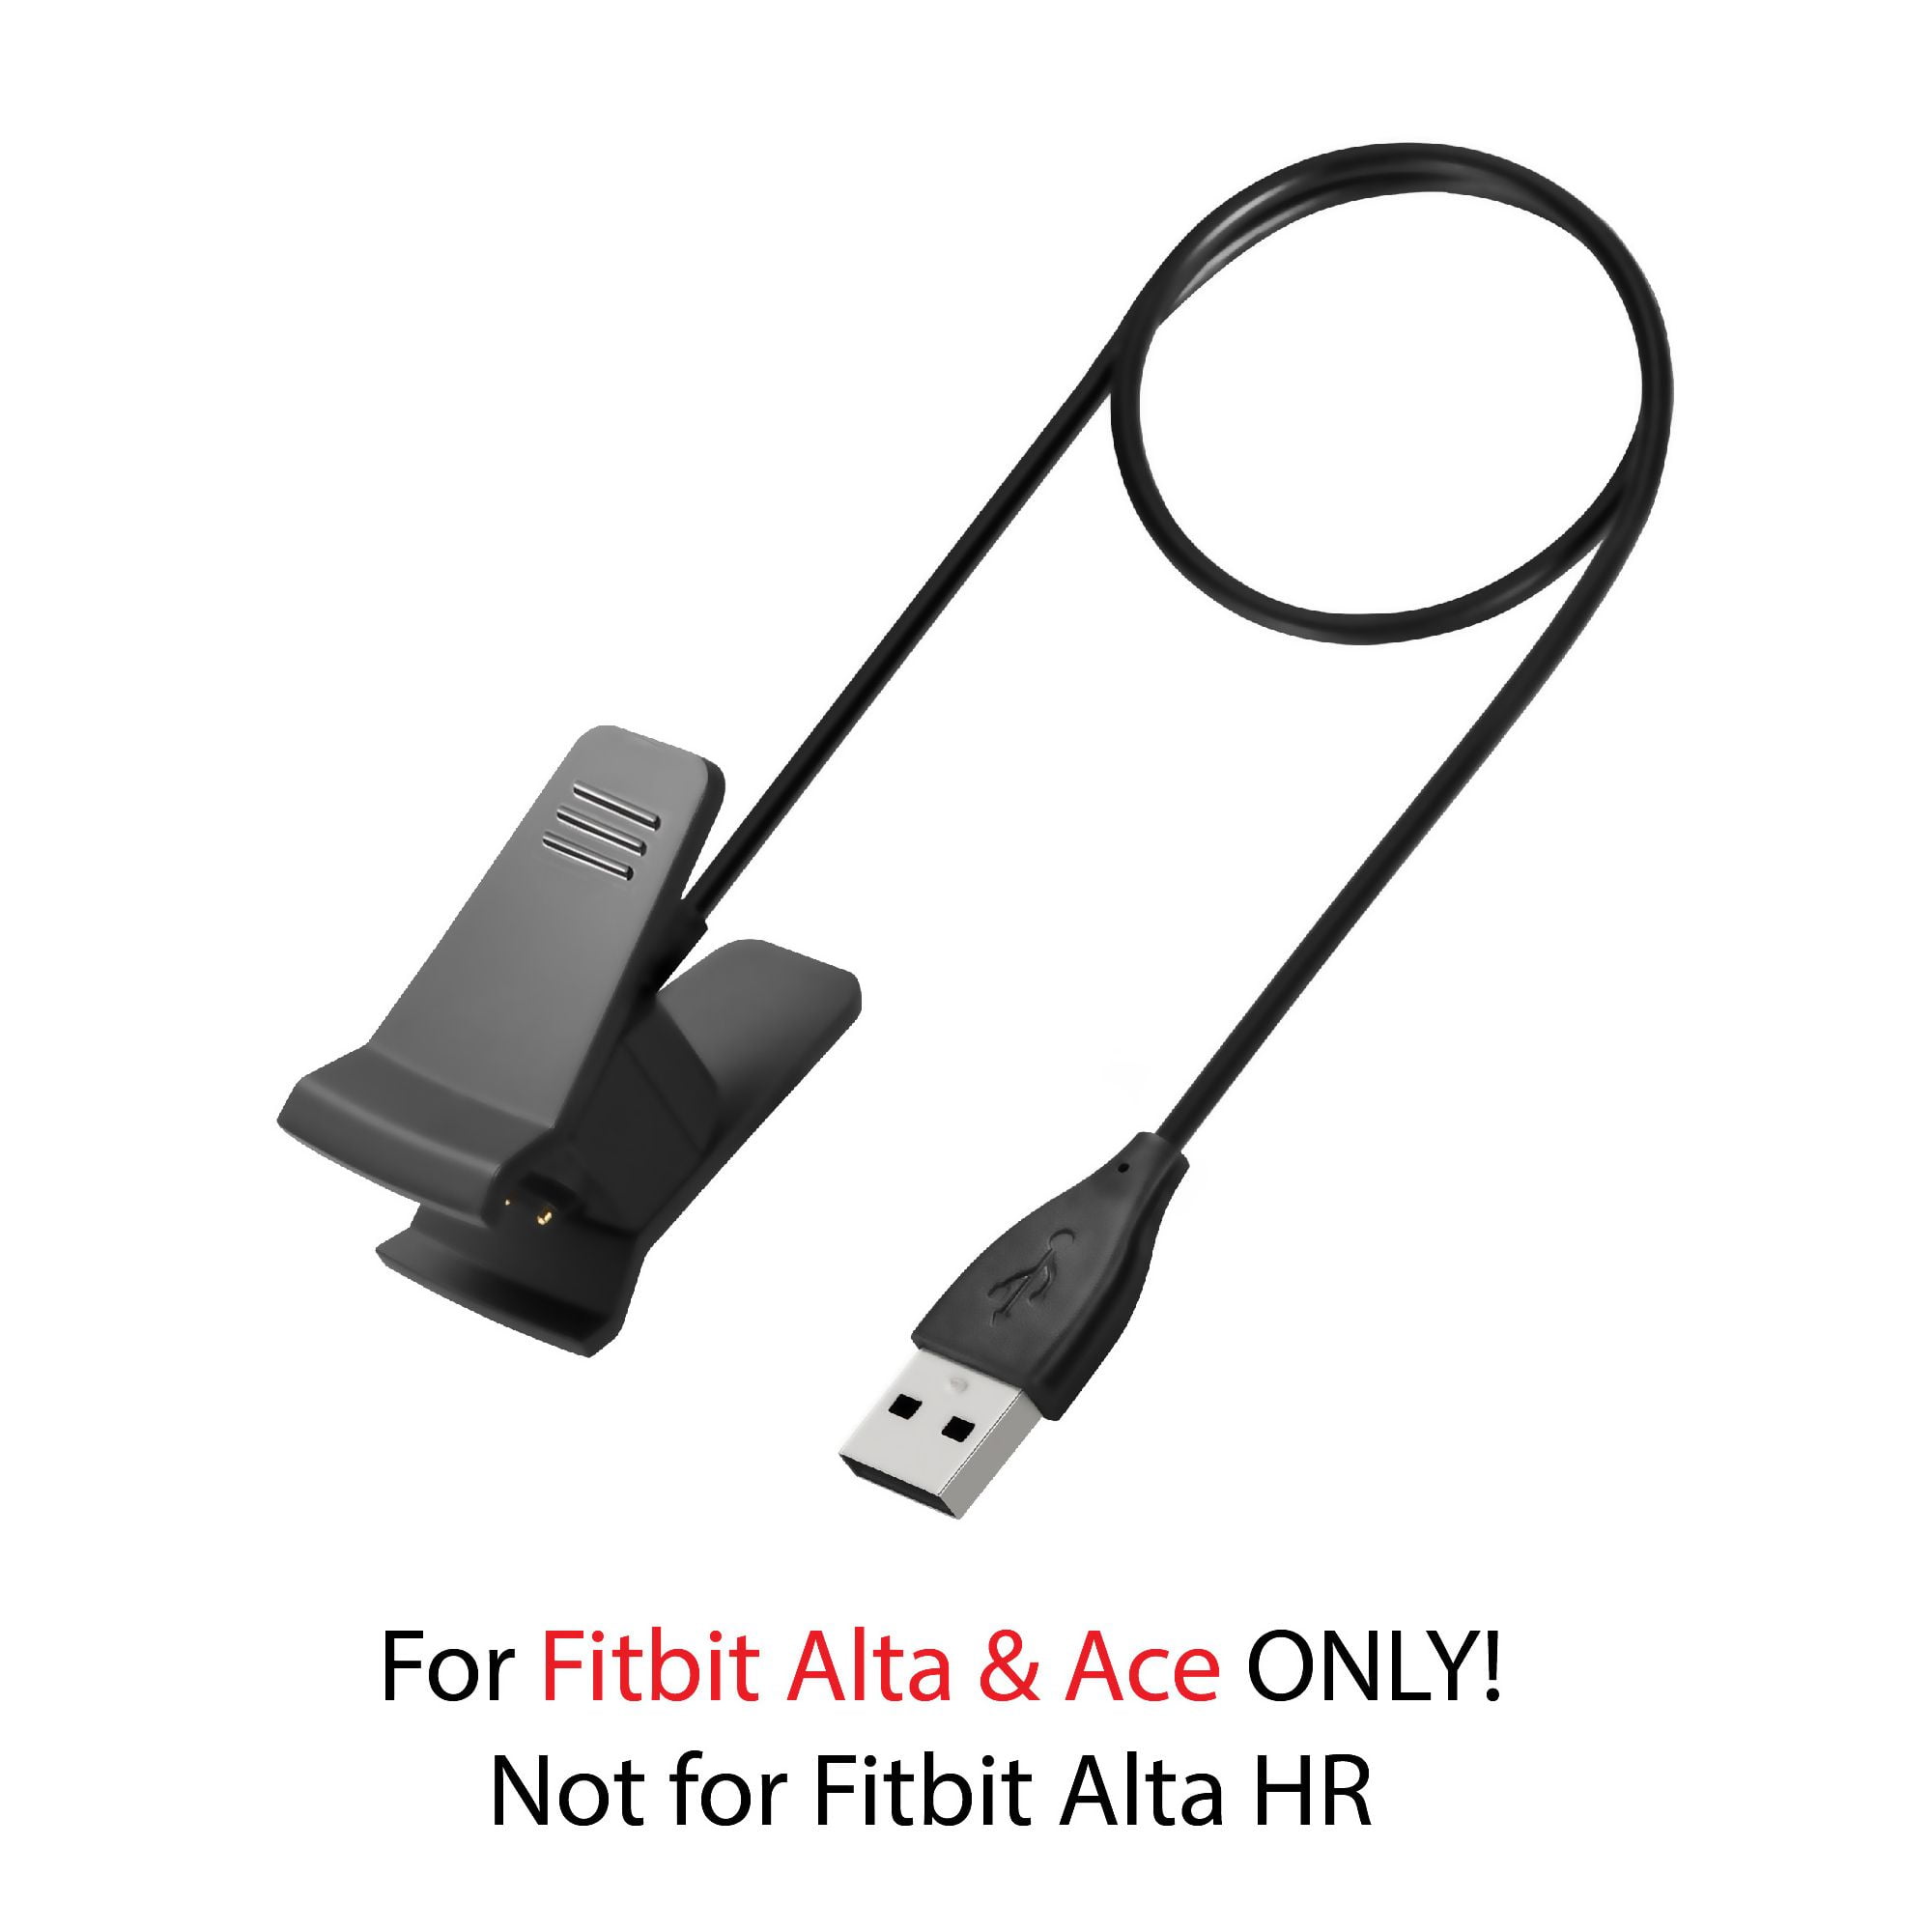 fitbit alta charger walmart canada